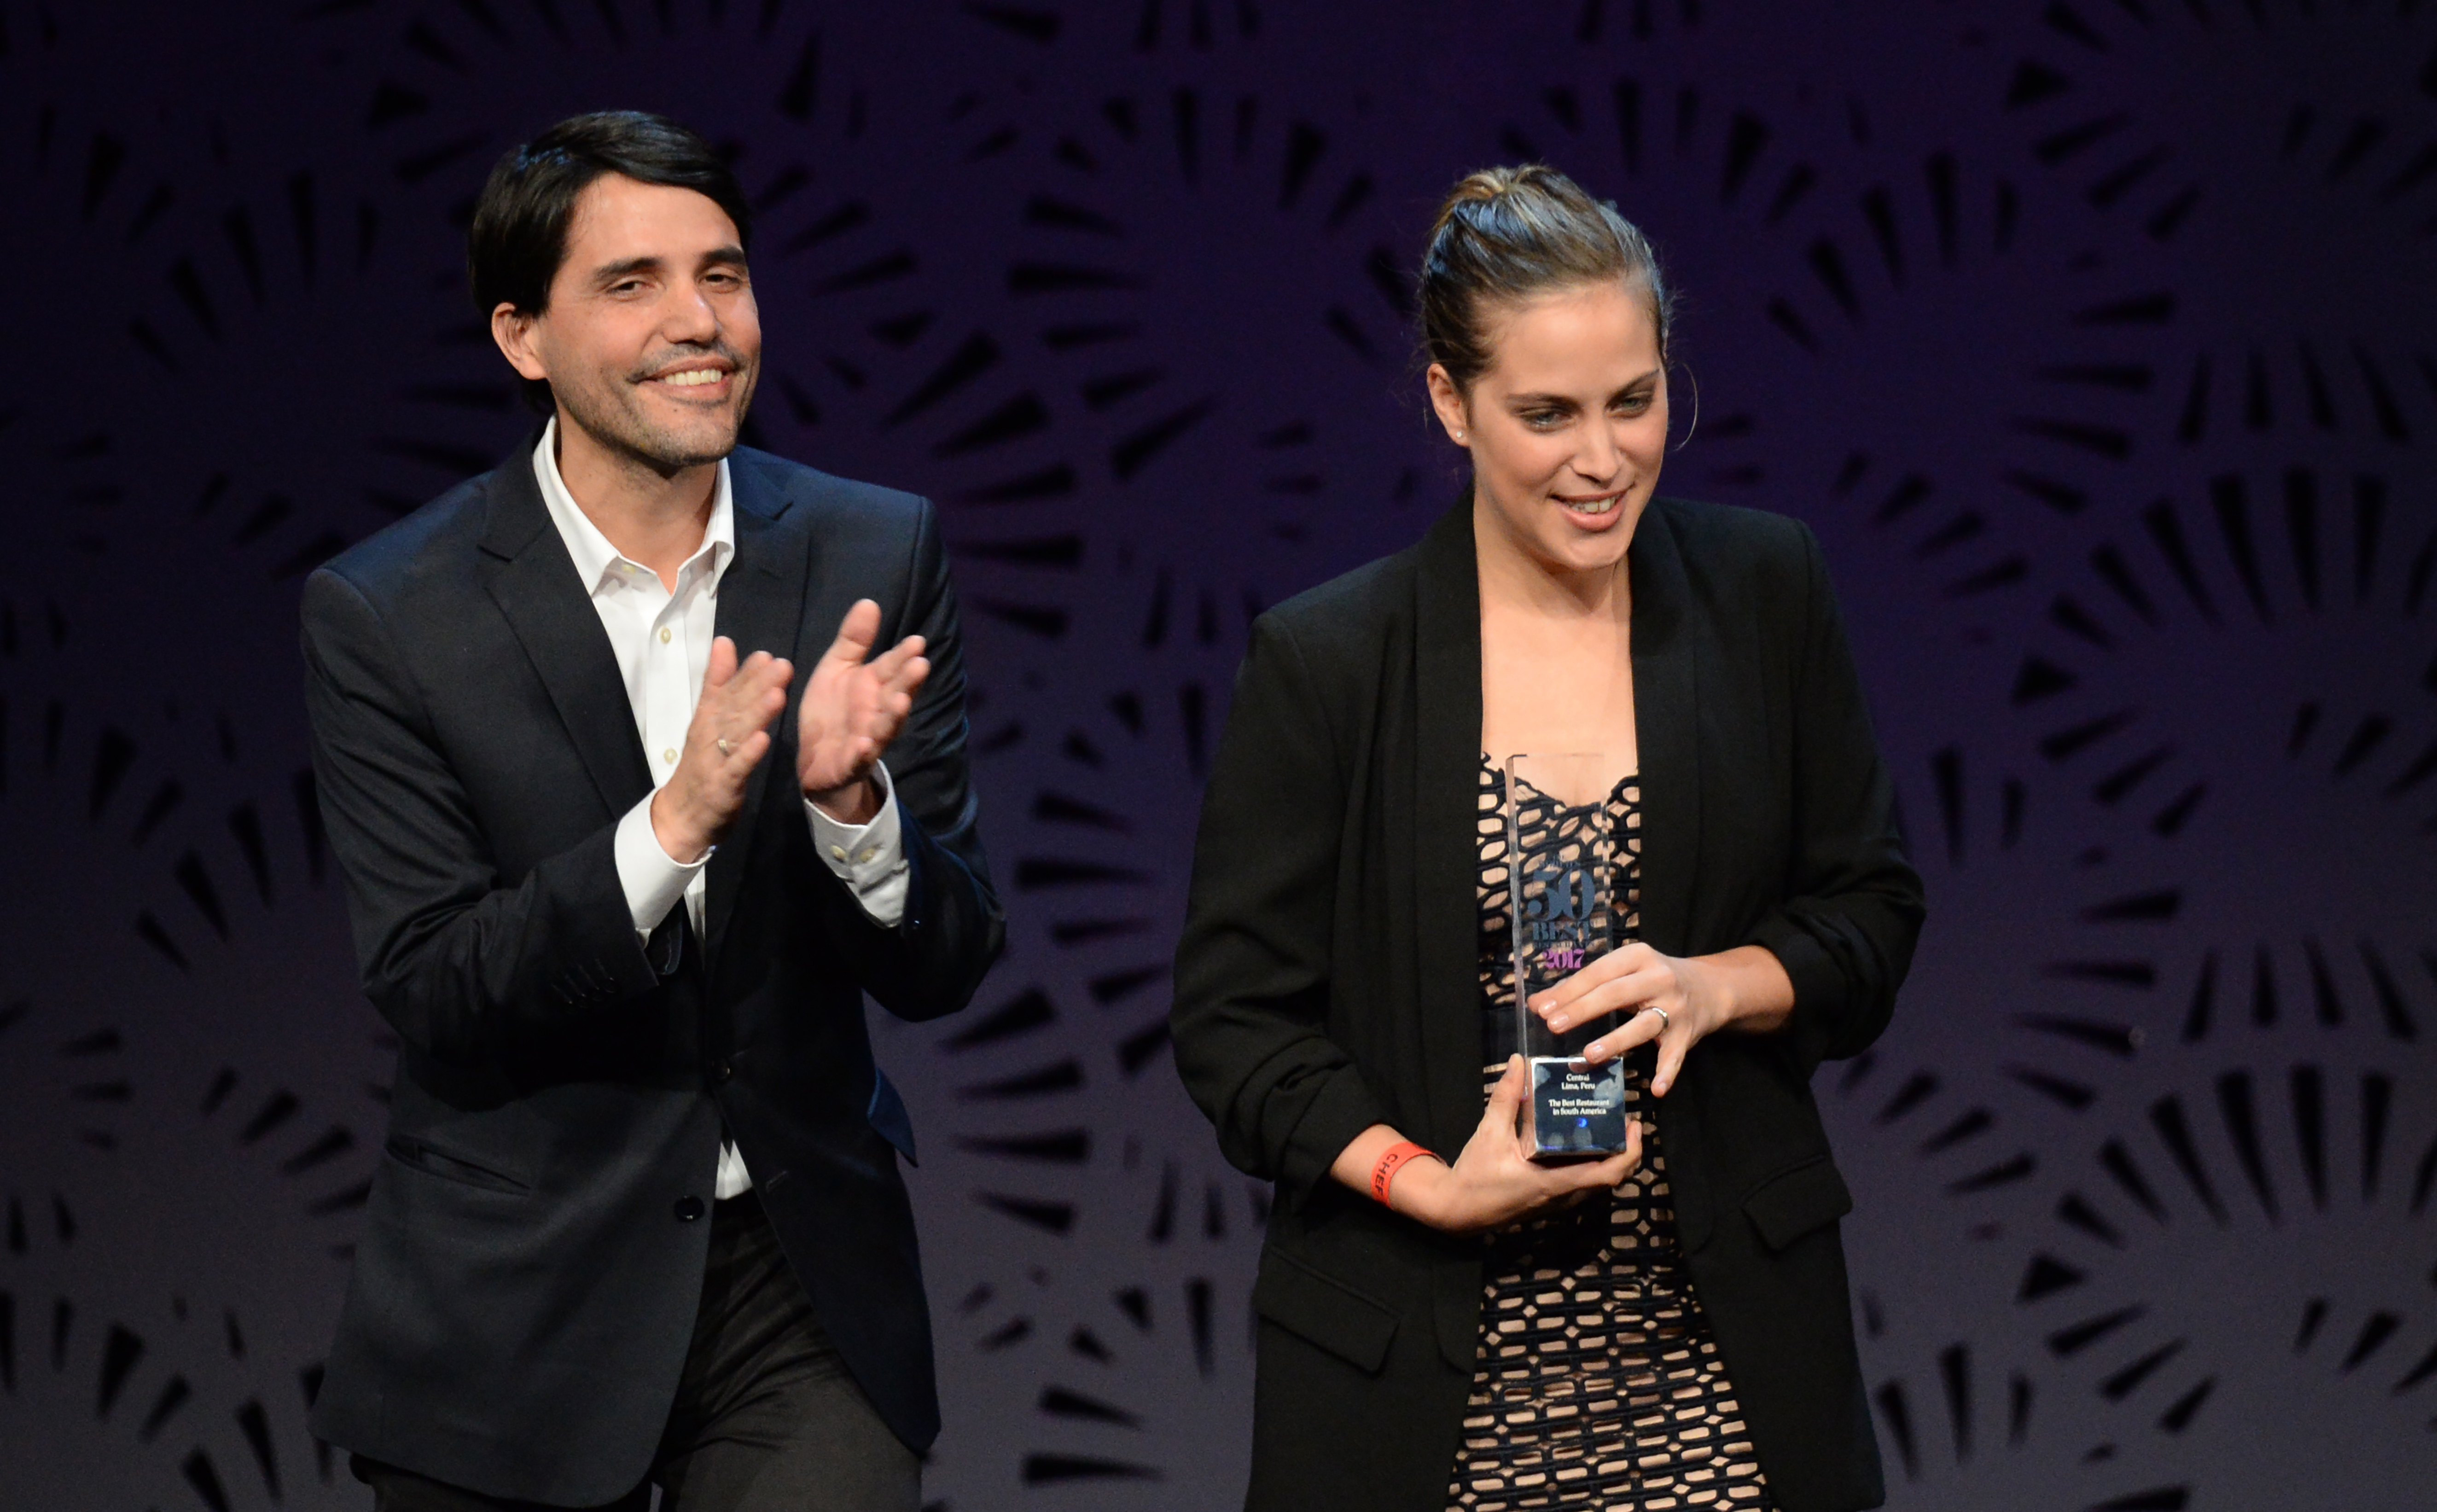 Chef Virgilio Martinez and his wife Pia celebrate after winning the Best Restaurant in South America award at the World’s 50 Best Restaurants awards in Melbourne on April 5, 2017. The chef has published a new cookbook on Latin American cuisine.